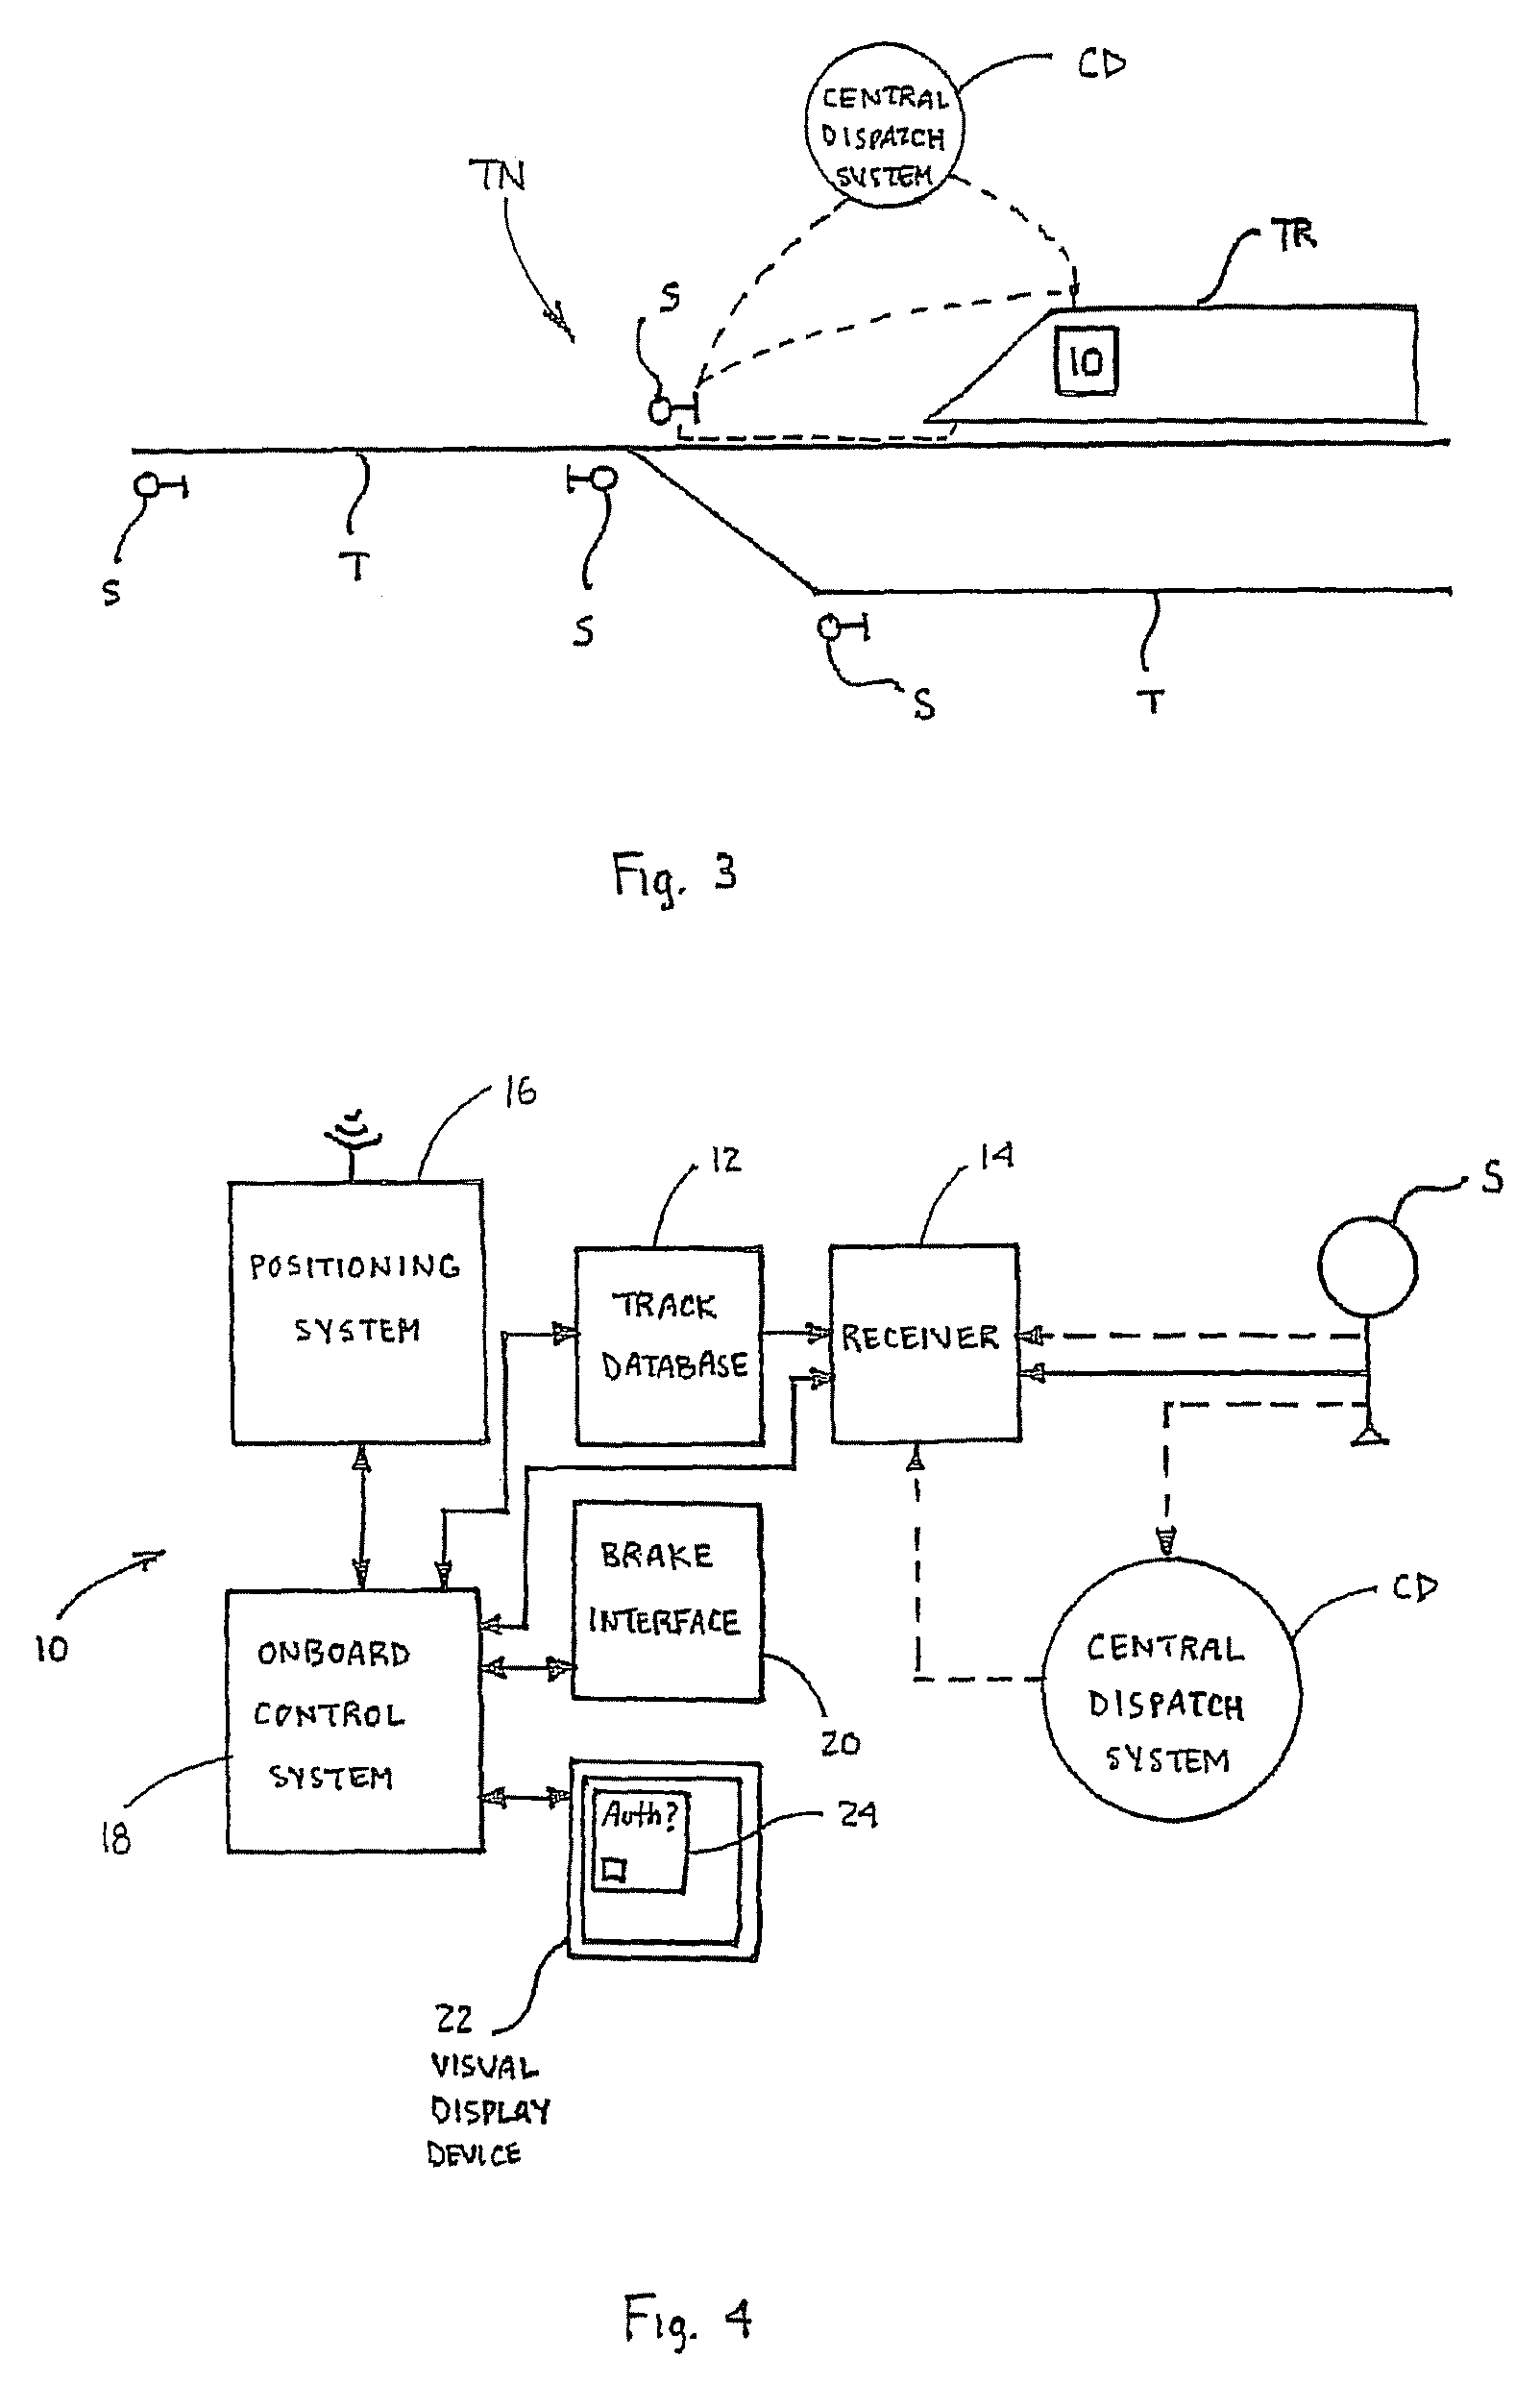 Train control method and system